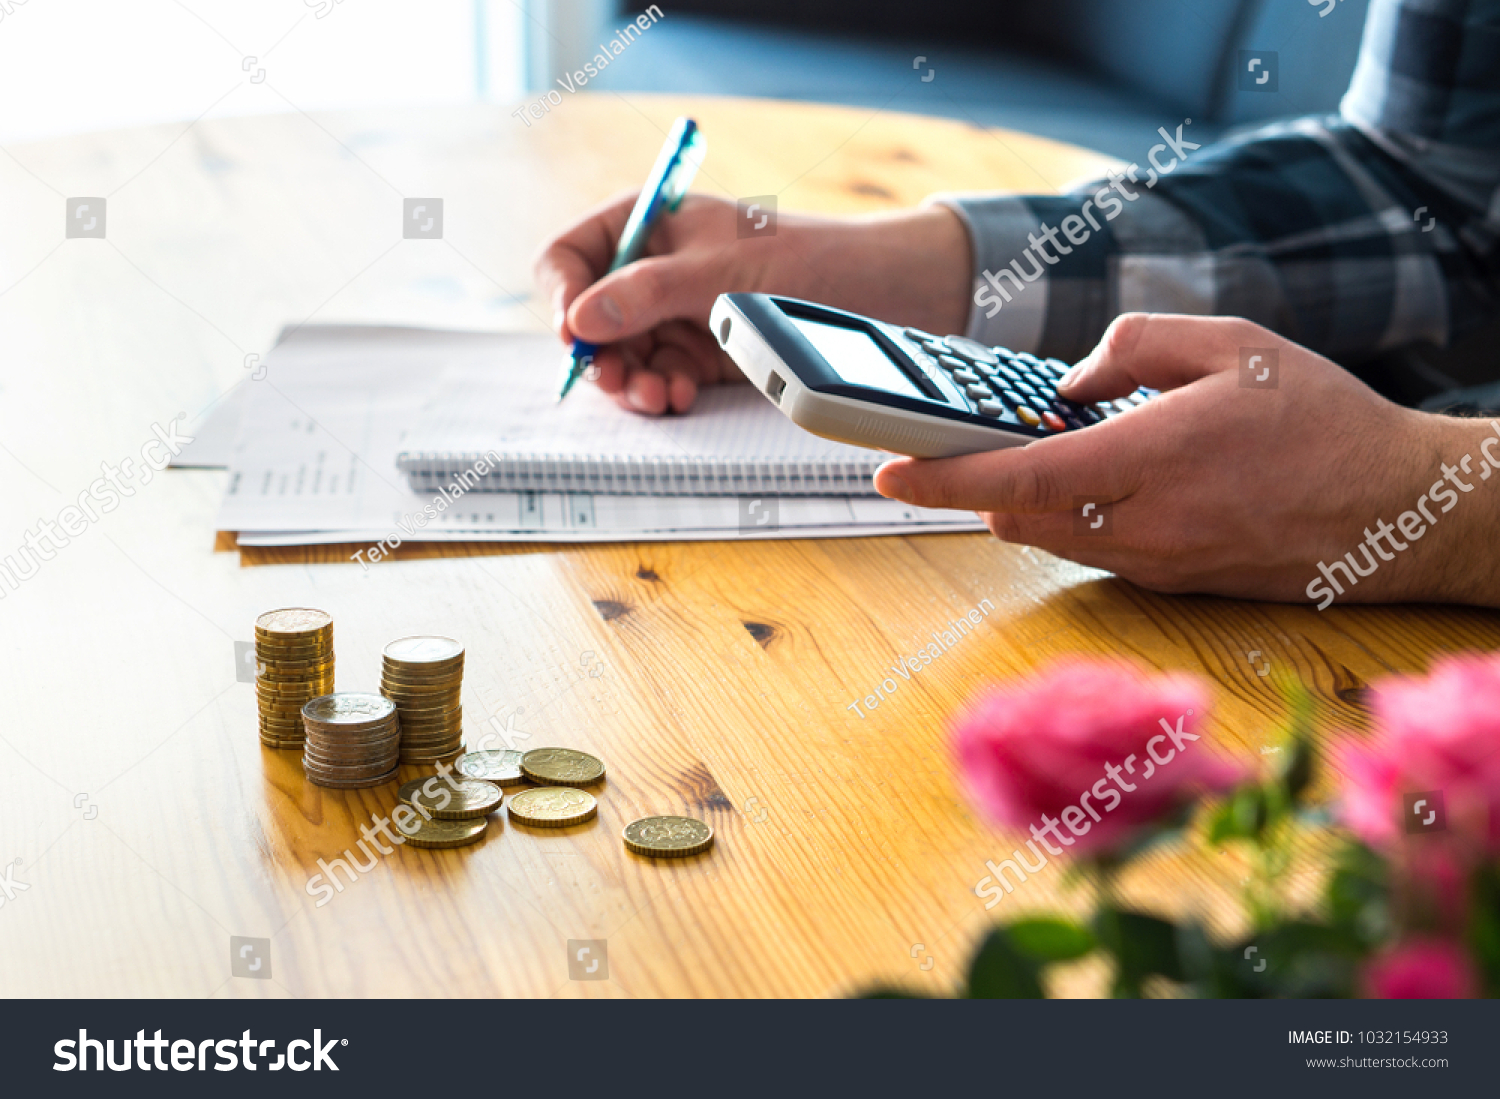 Man using calculator and counting budget, expenses and savings. Low income family living cost and rising prices concept. Calculating and budgeting. Making retirement plan. Writing notes on paper.  #1032154933